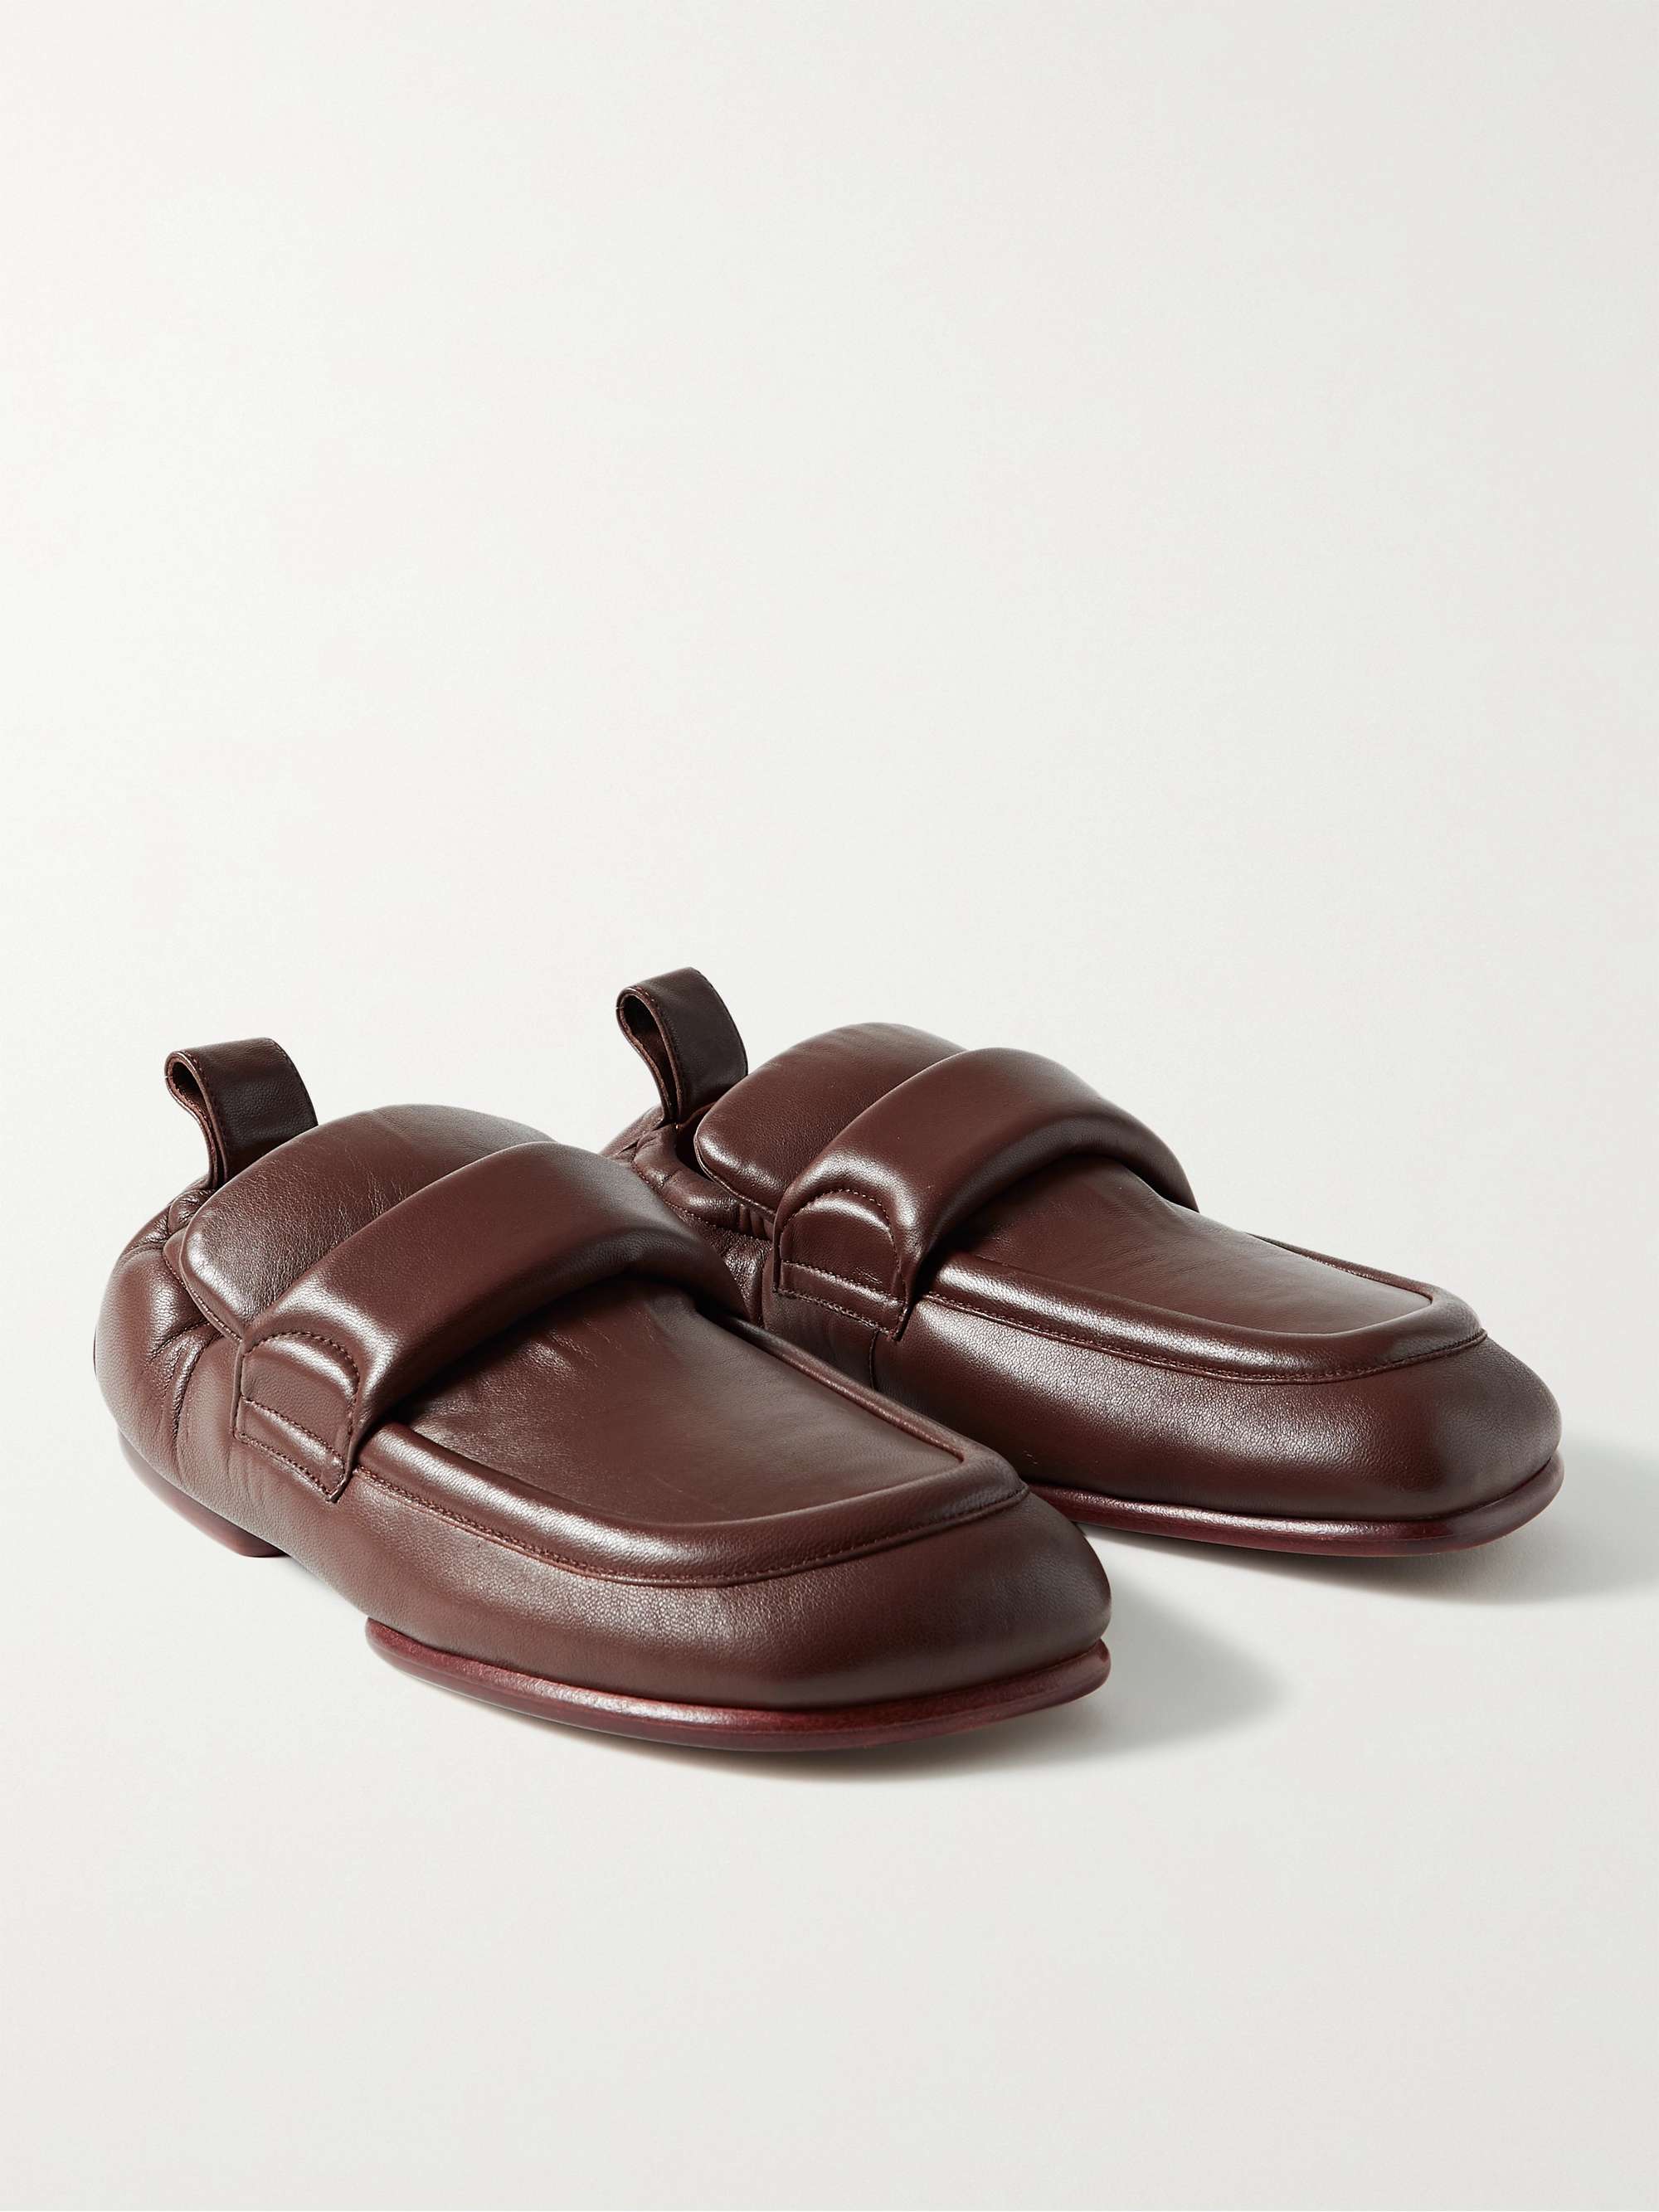 DRIES VAN NOTEN Padded Leather Loafers